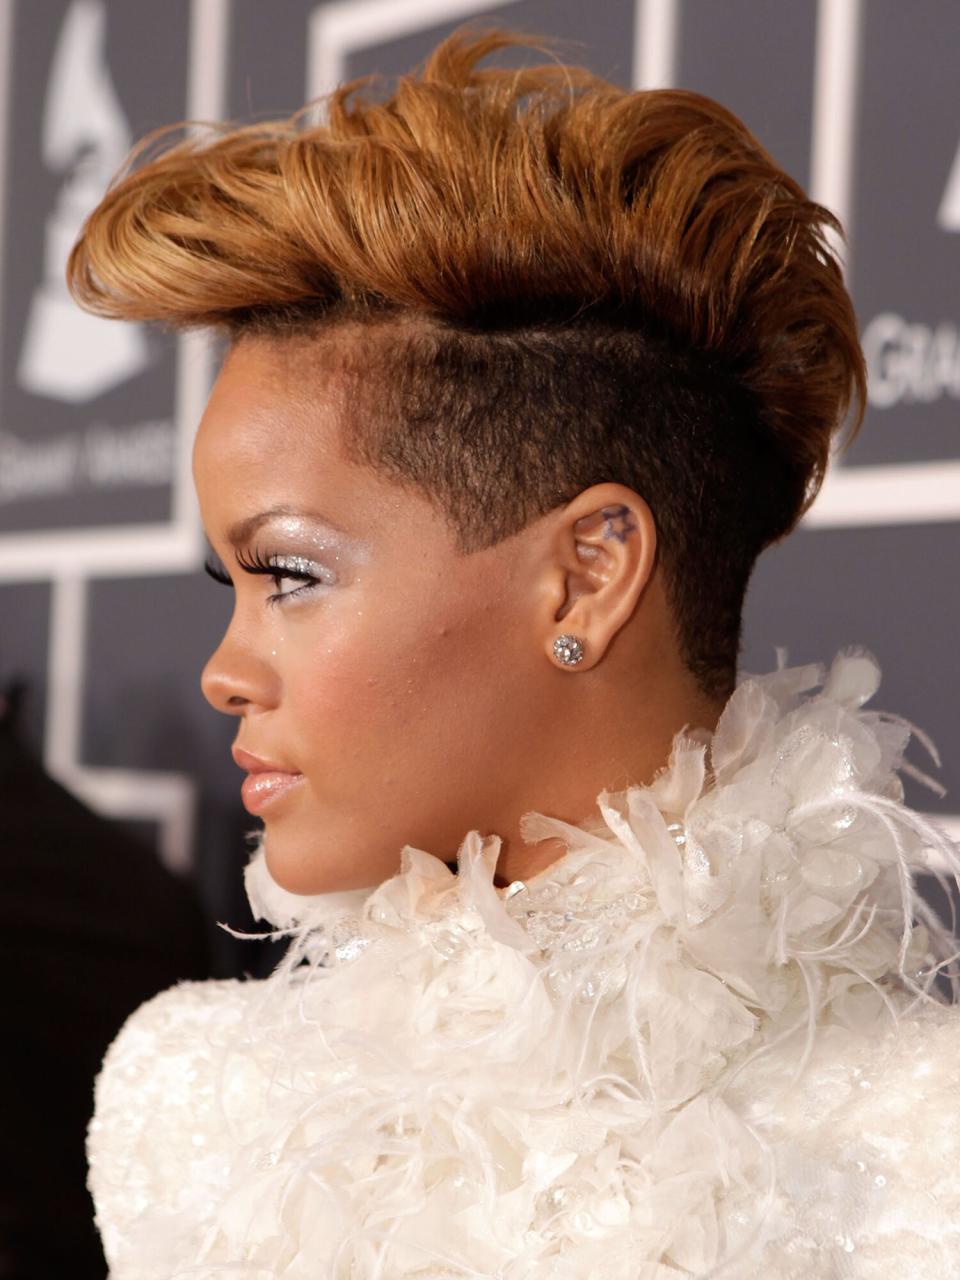 Rihanna arrives at the 52nd Annual GRAMMY Awards held at Staples Center on January 31, 2010 in Los Angeles, California.